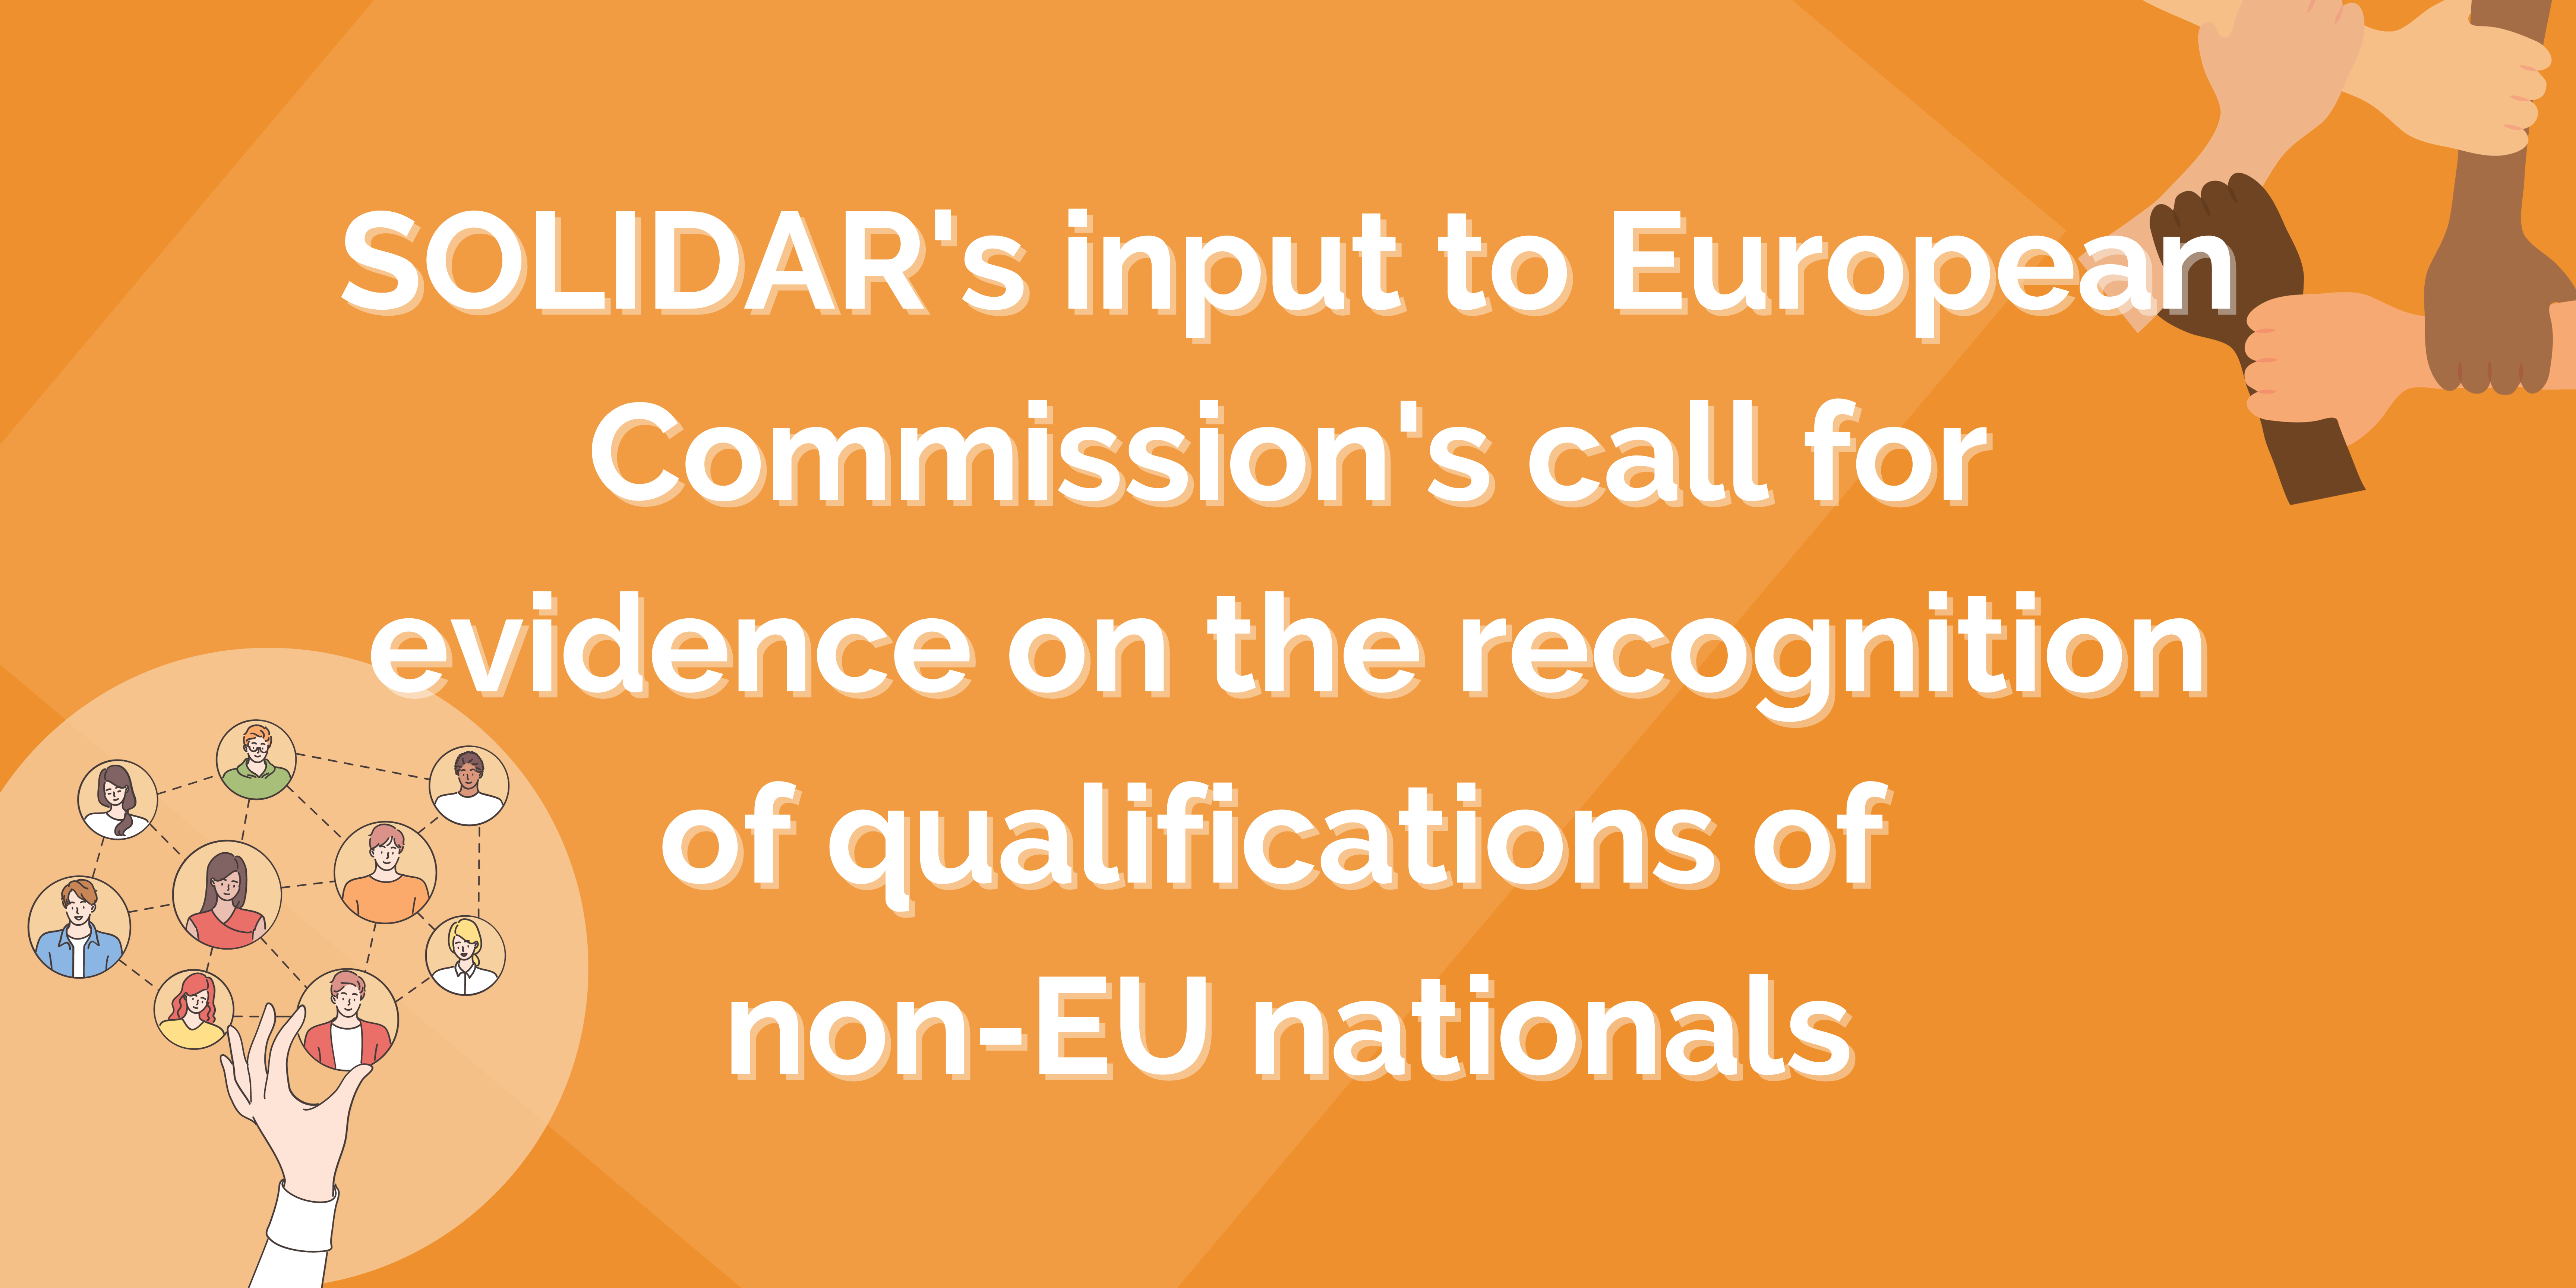 SOLIDAR’s input on the recognition of qualifications of non-EU nationals